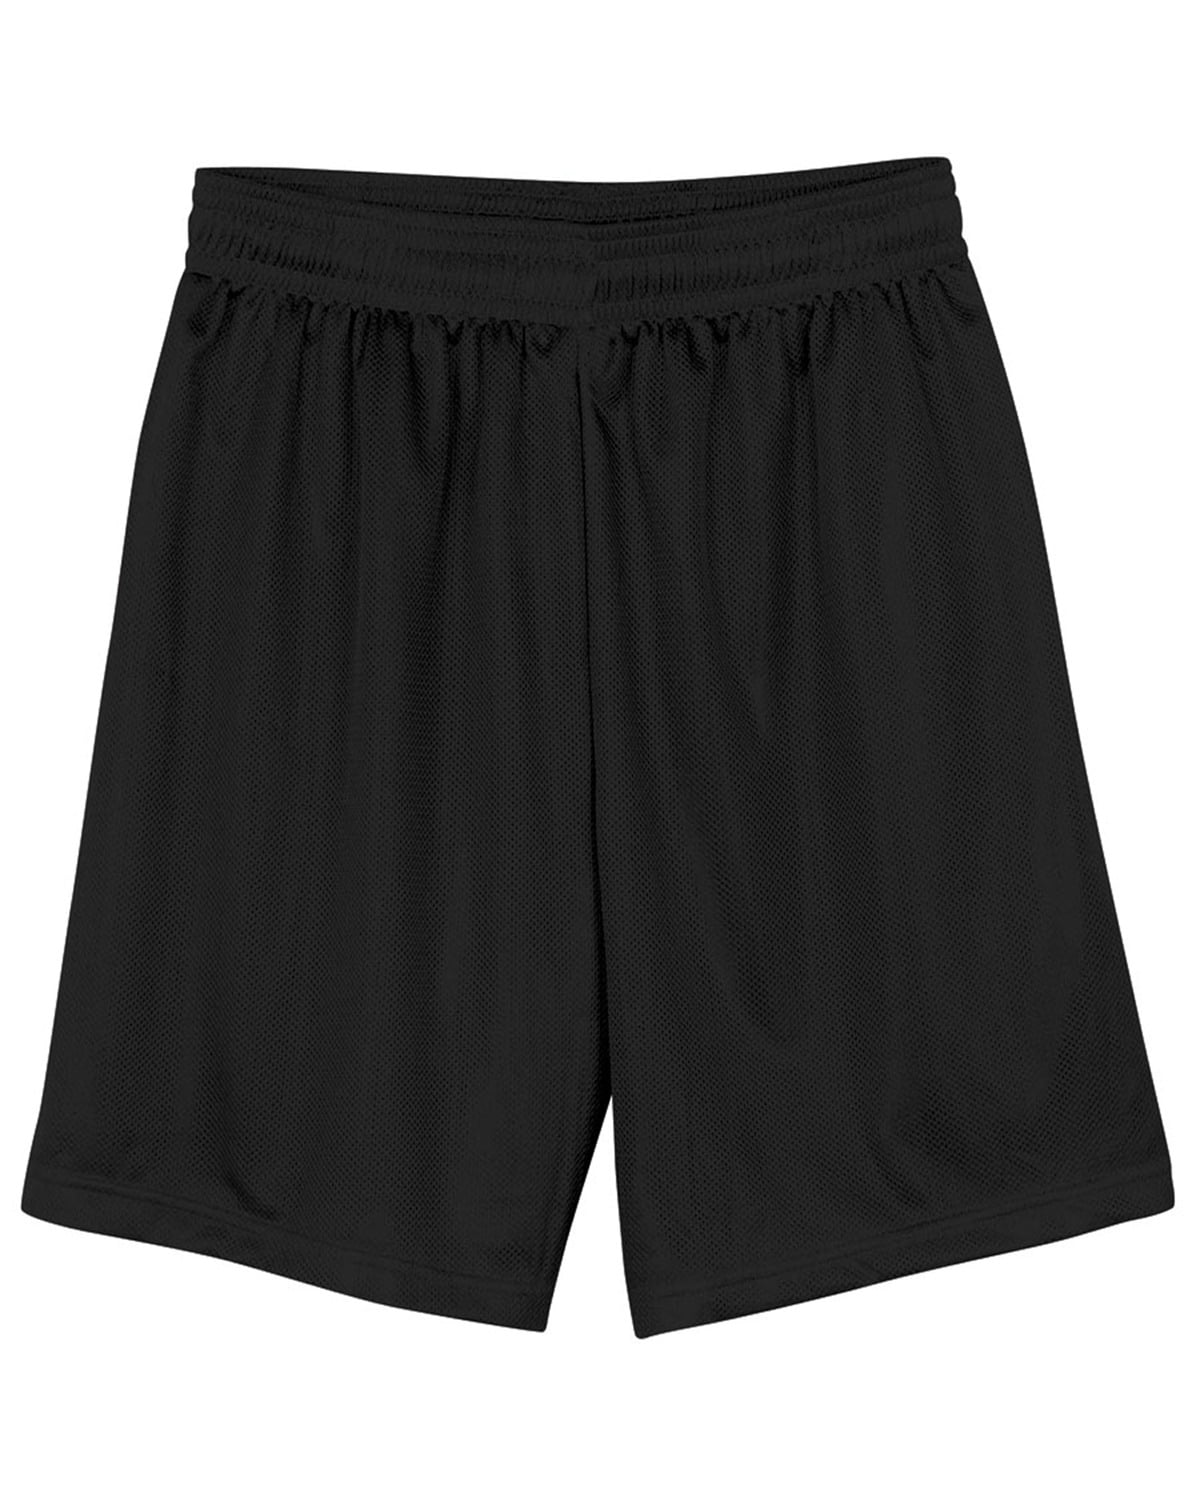 Reebok Men's Cadence 2-In-1 Compression Shorts, 9 Inseam, up to